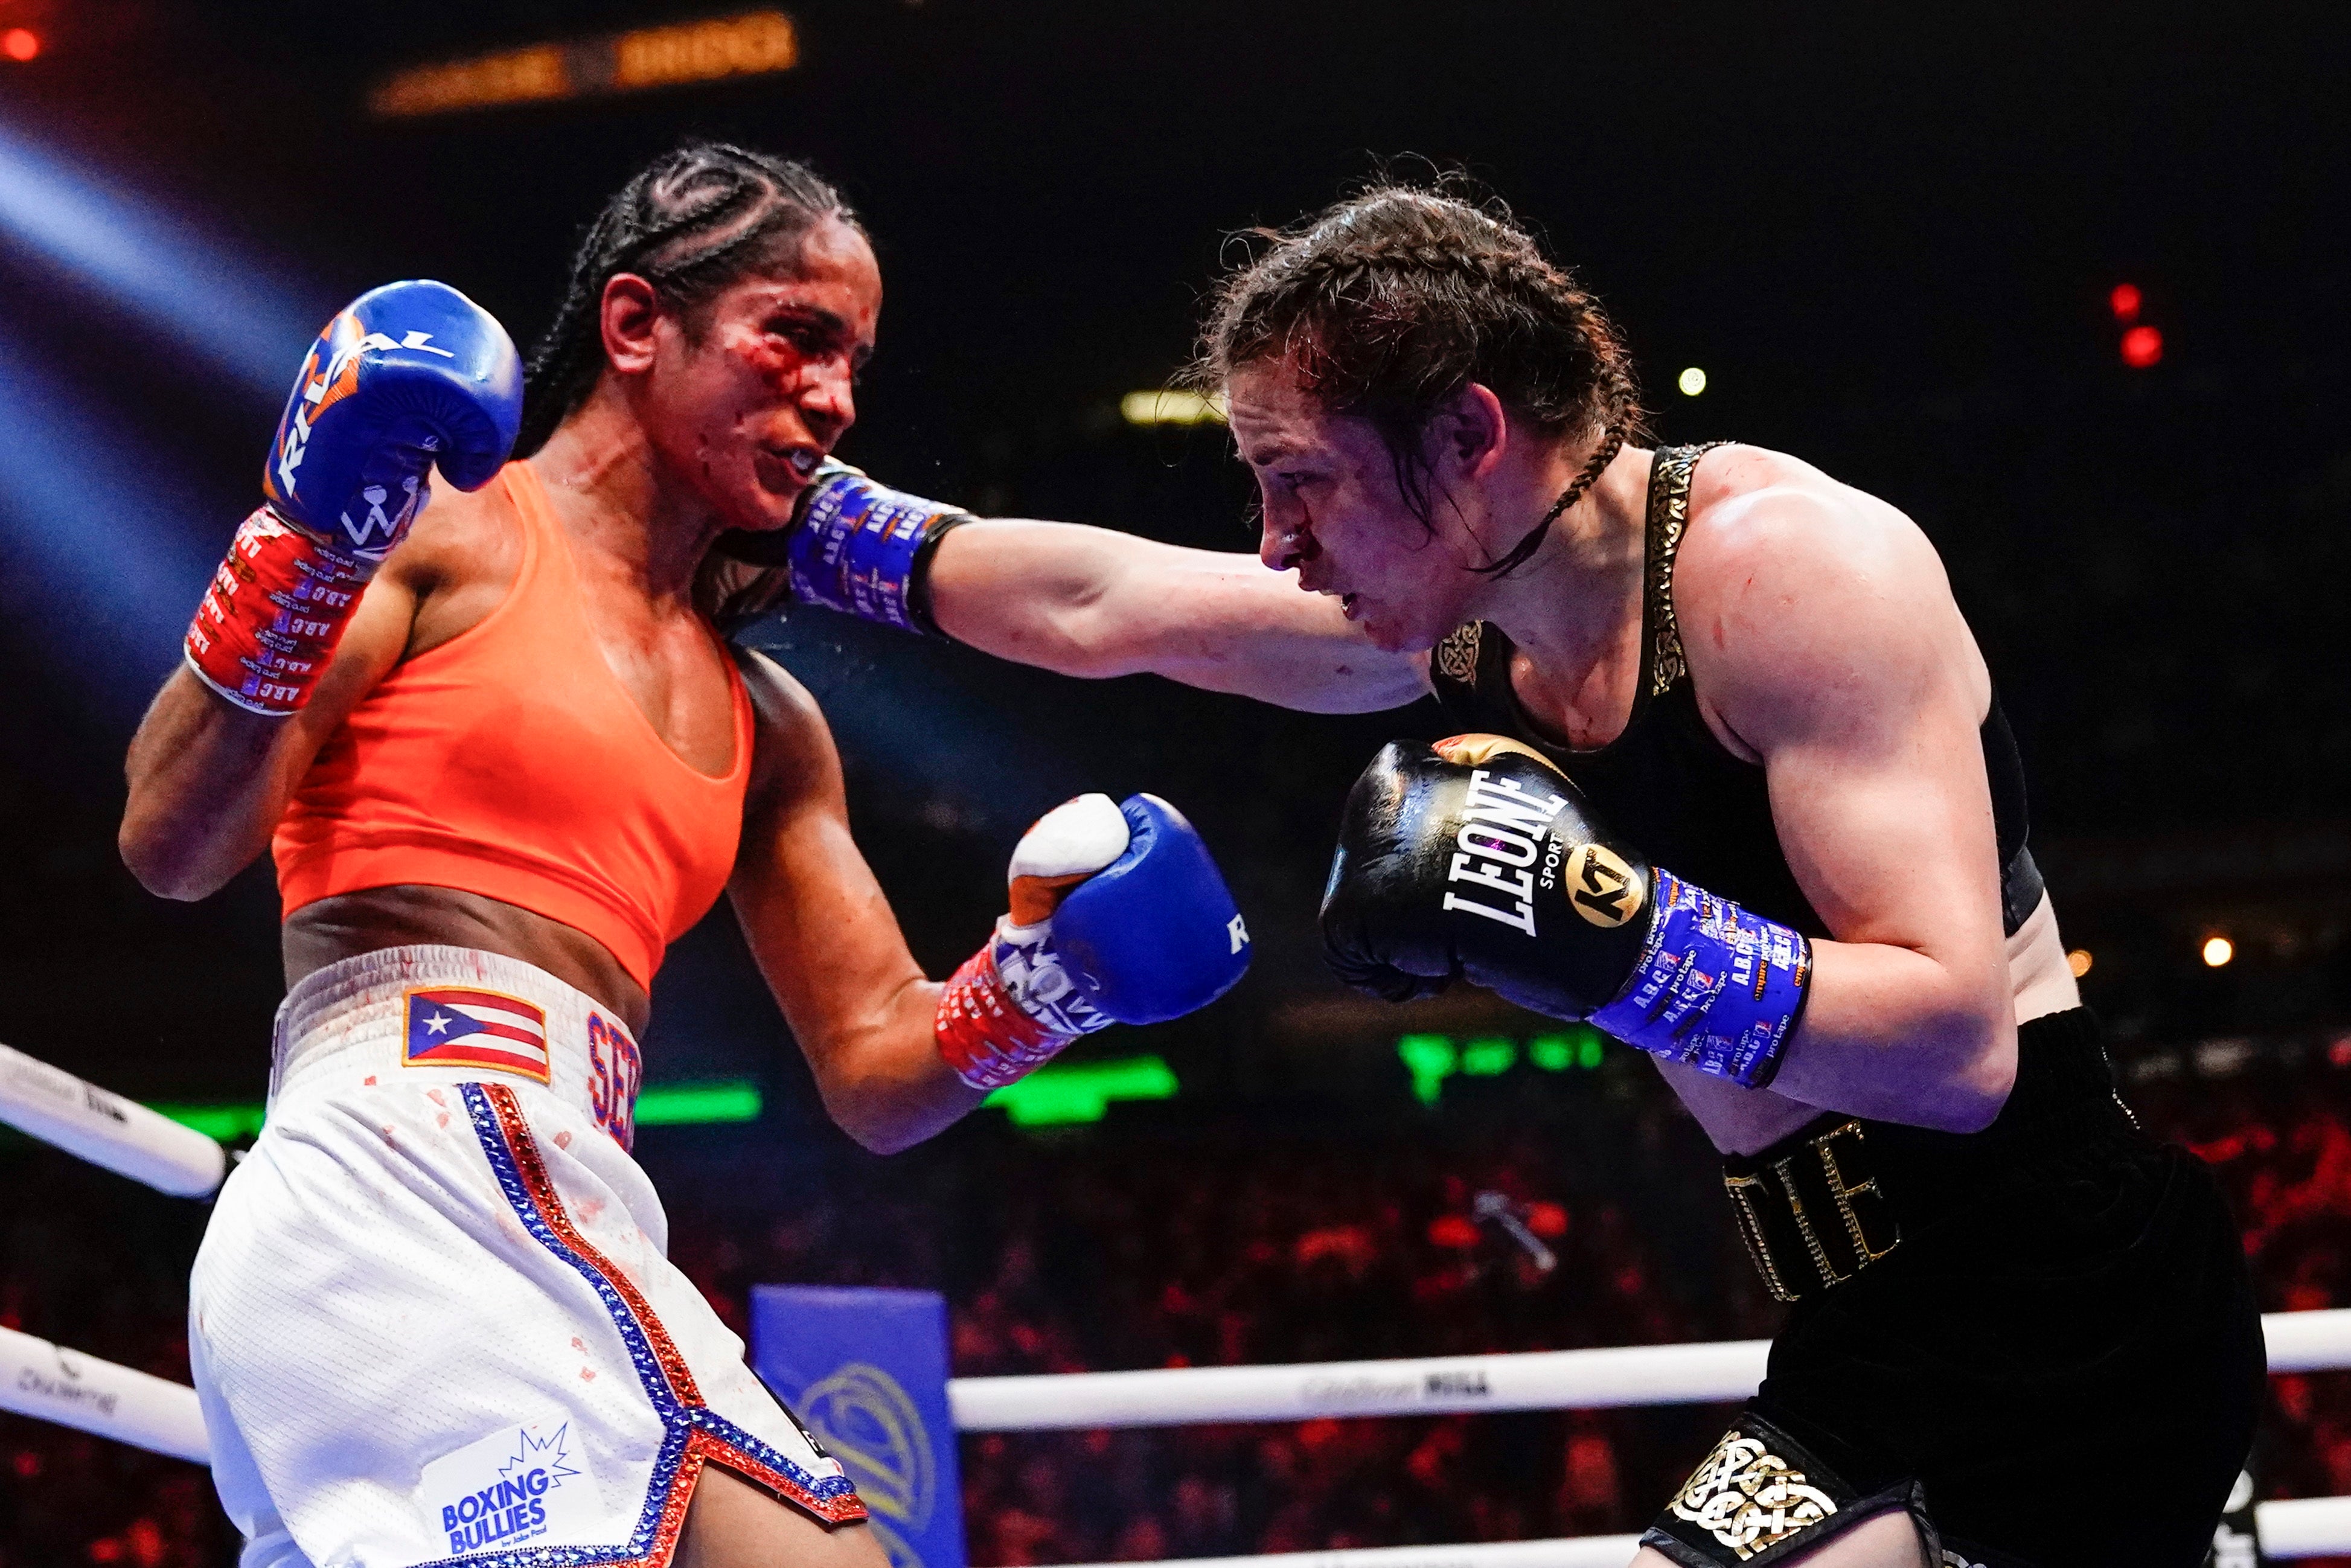 Katie Taylor (right) remained undisputed lightweight champion after edging past Amanda Serrano at Madison Square Garden